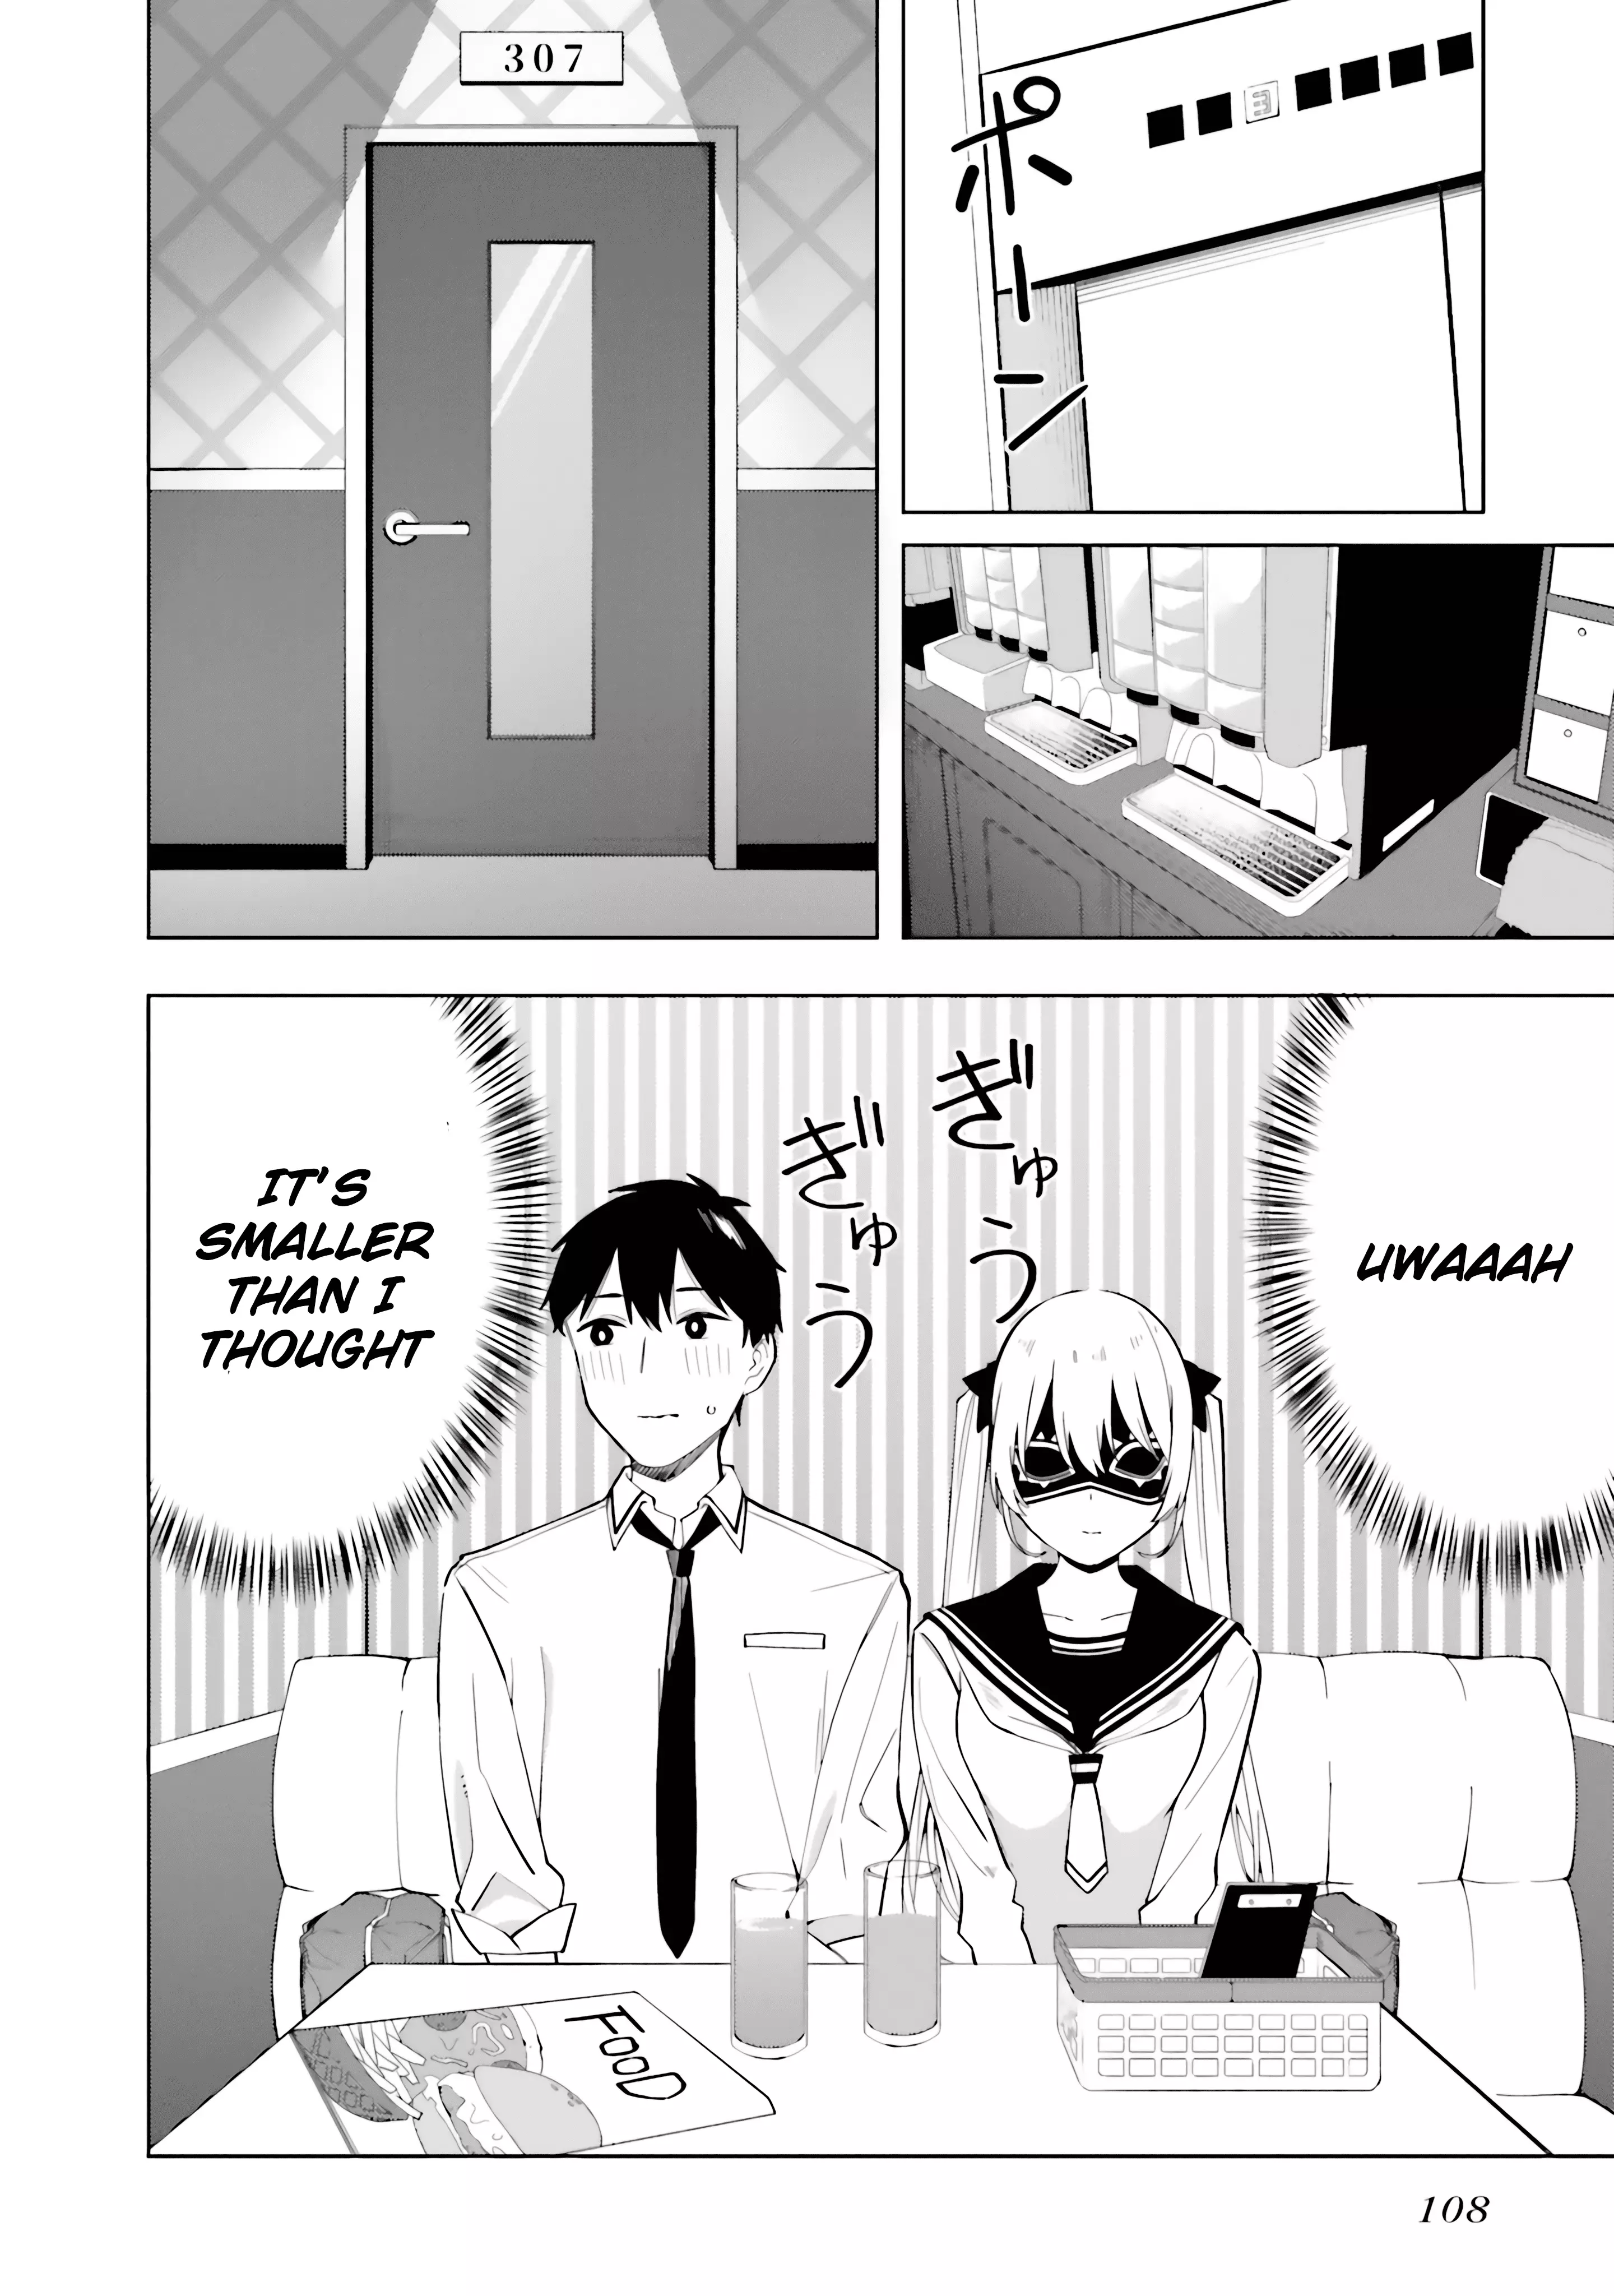 I Don't Understand Shirogane-San's Facial Expression At All - 16 page 17-299955d4